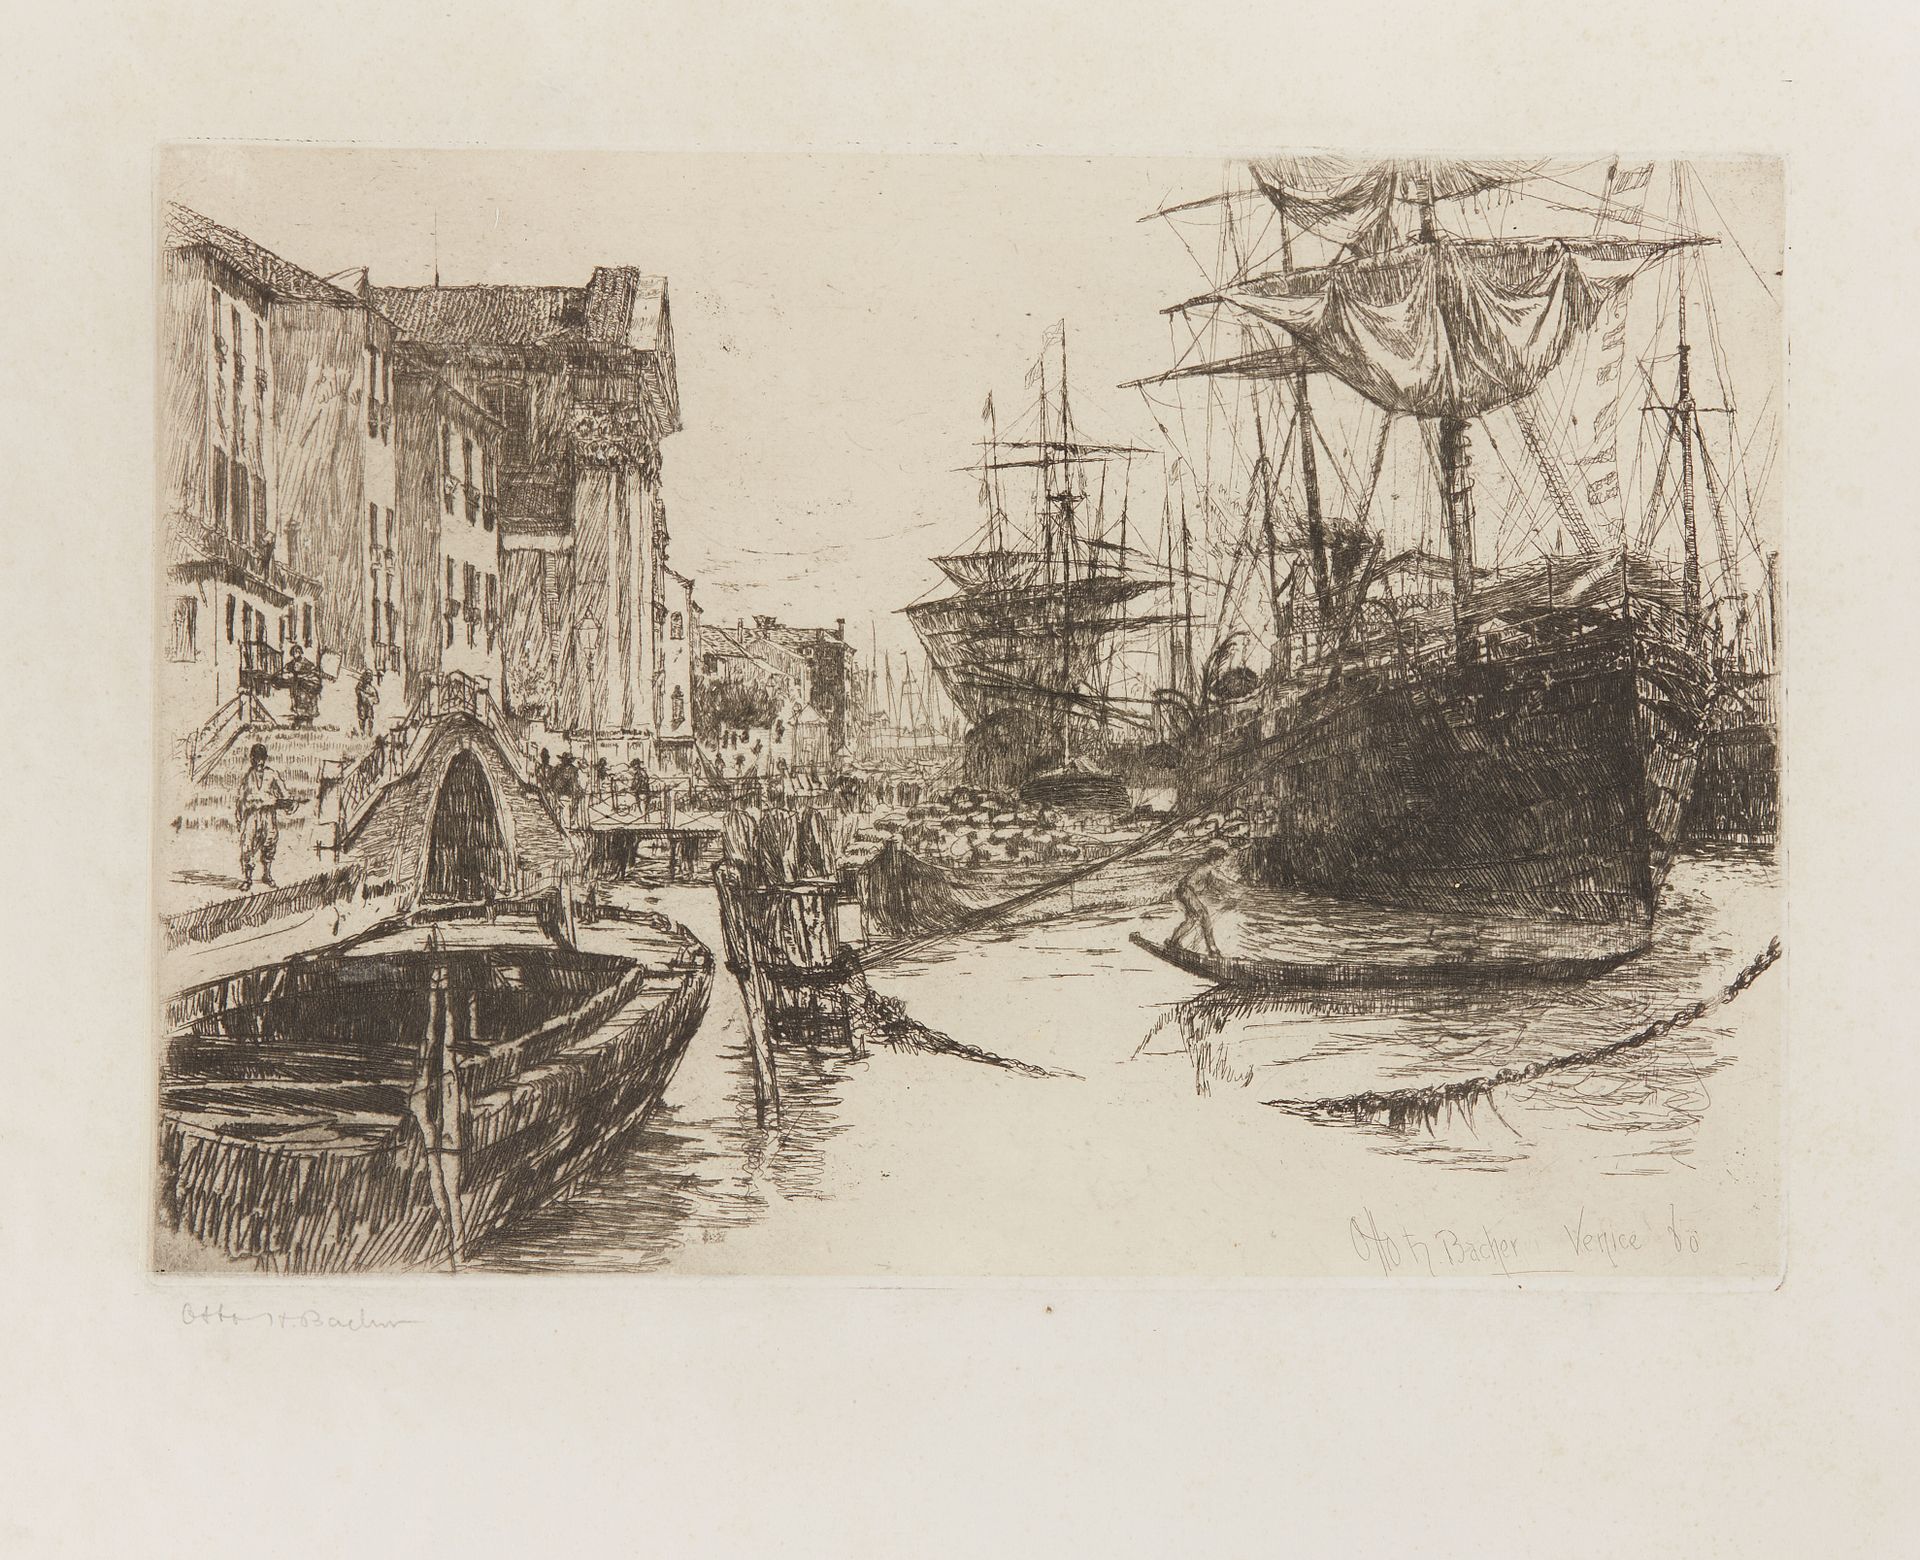 Null OTTO BACHER 

Venice

Etching signed and dated 1880 lower right.

The sheet&hellip;